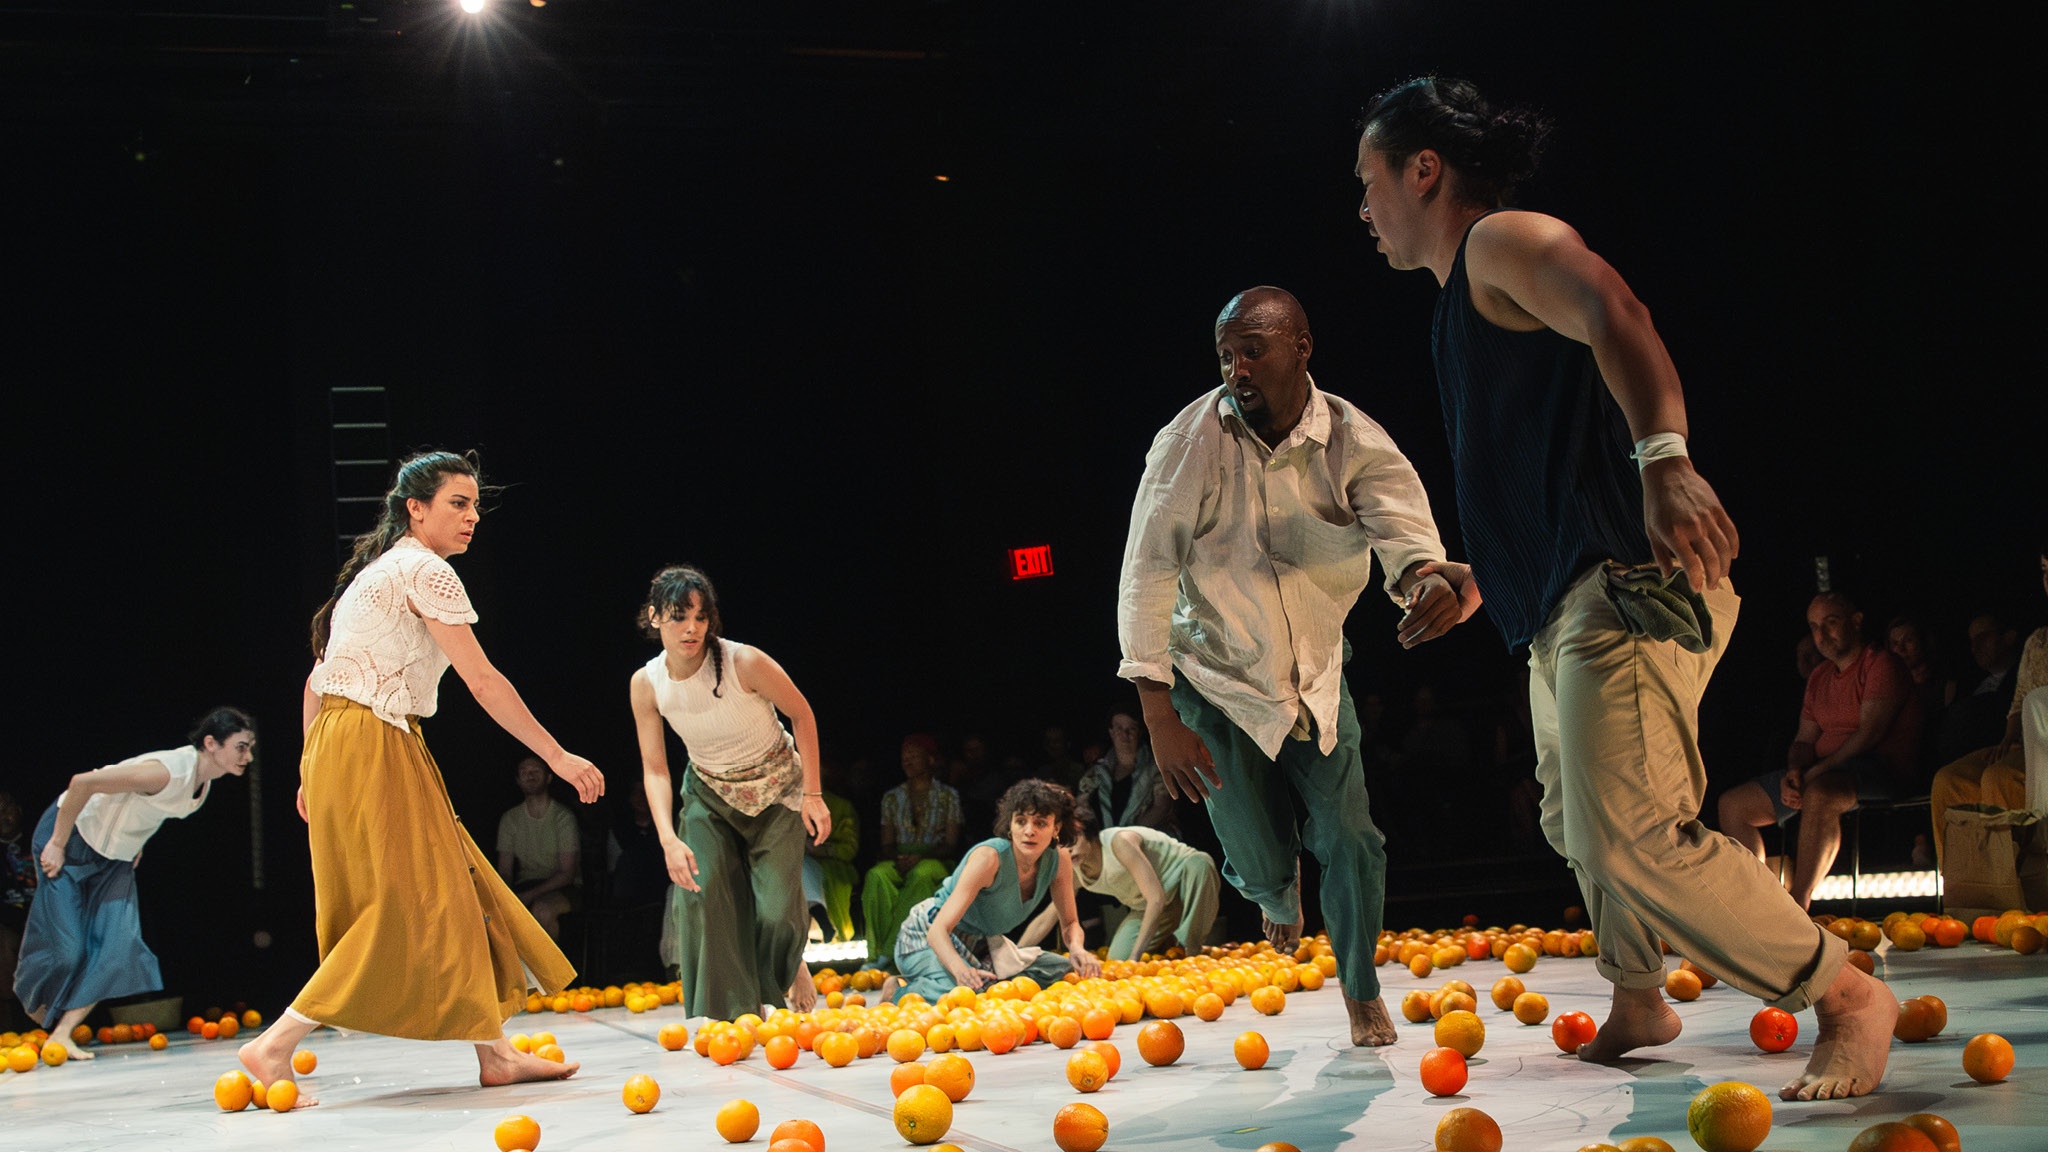 Dancers move energetically around a central performance space strewn with brightly colored oranges. 